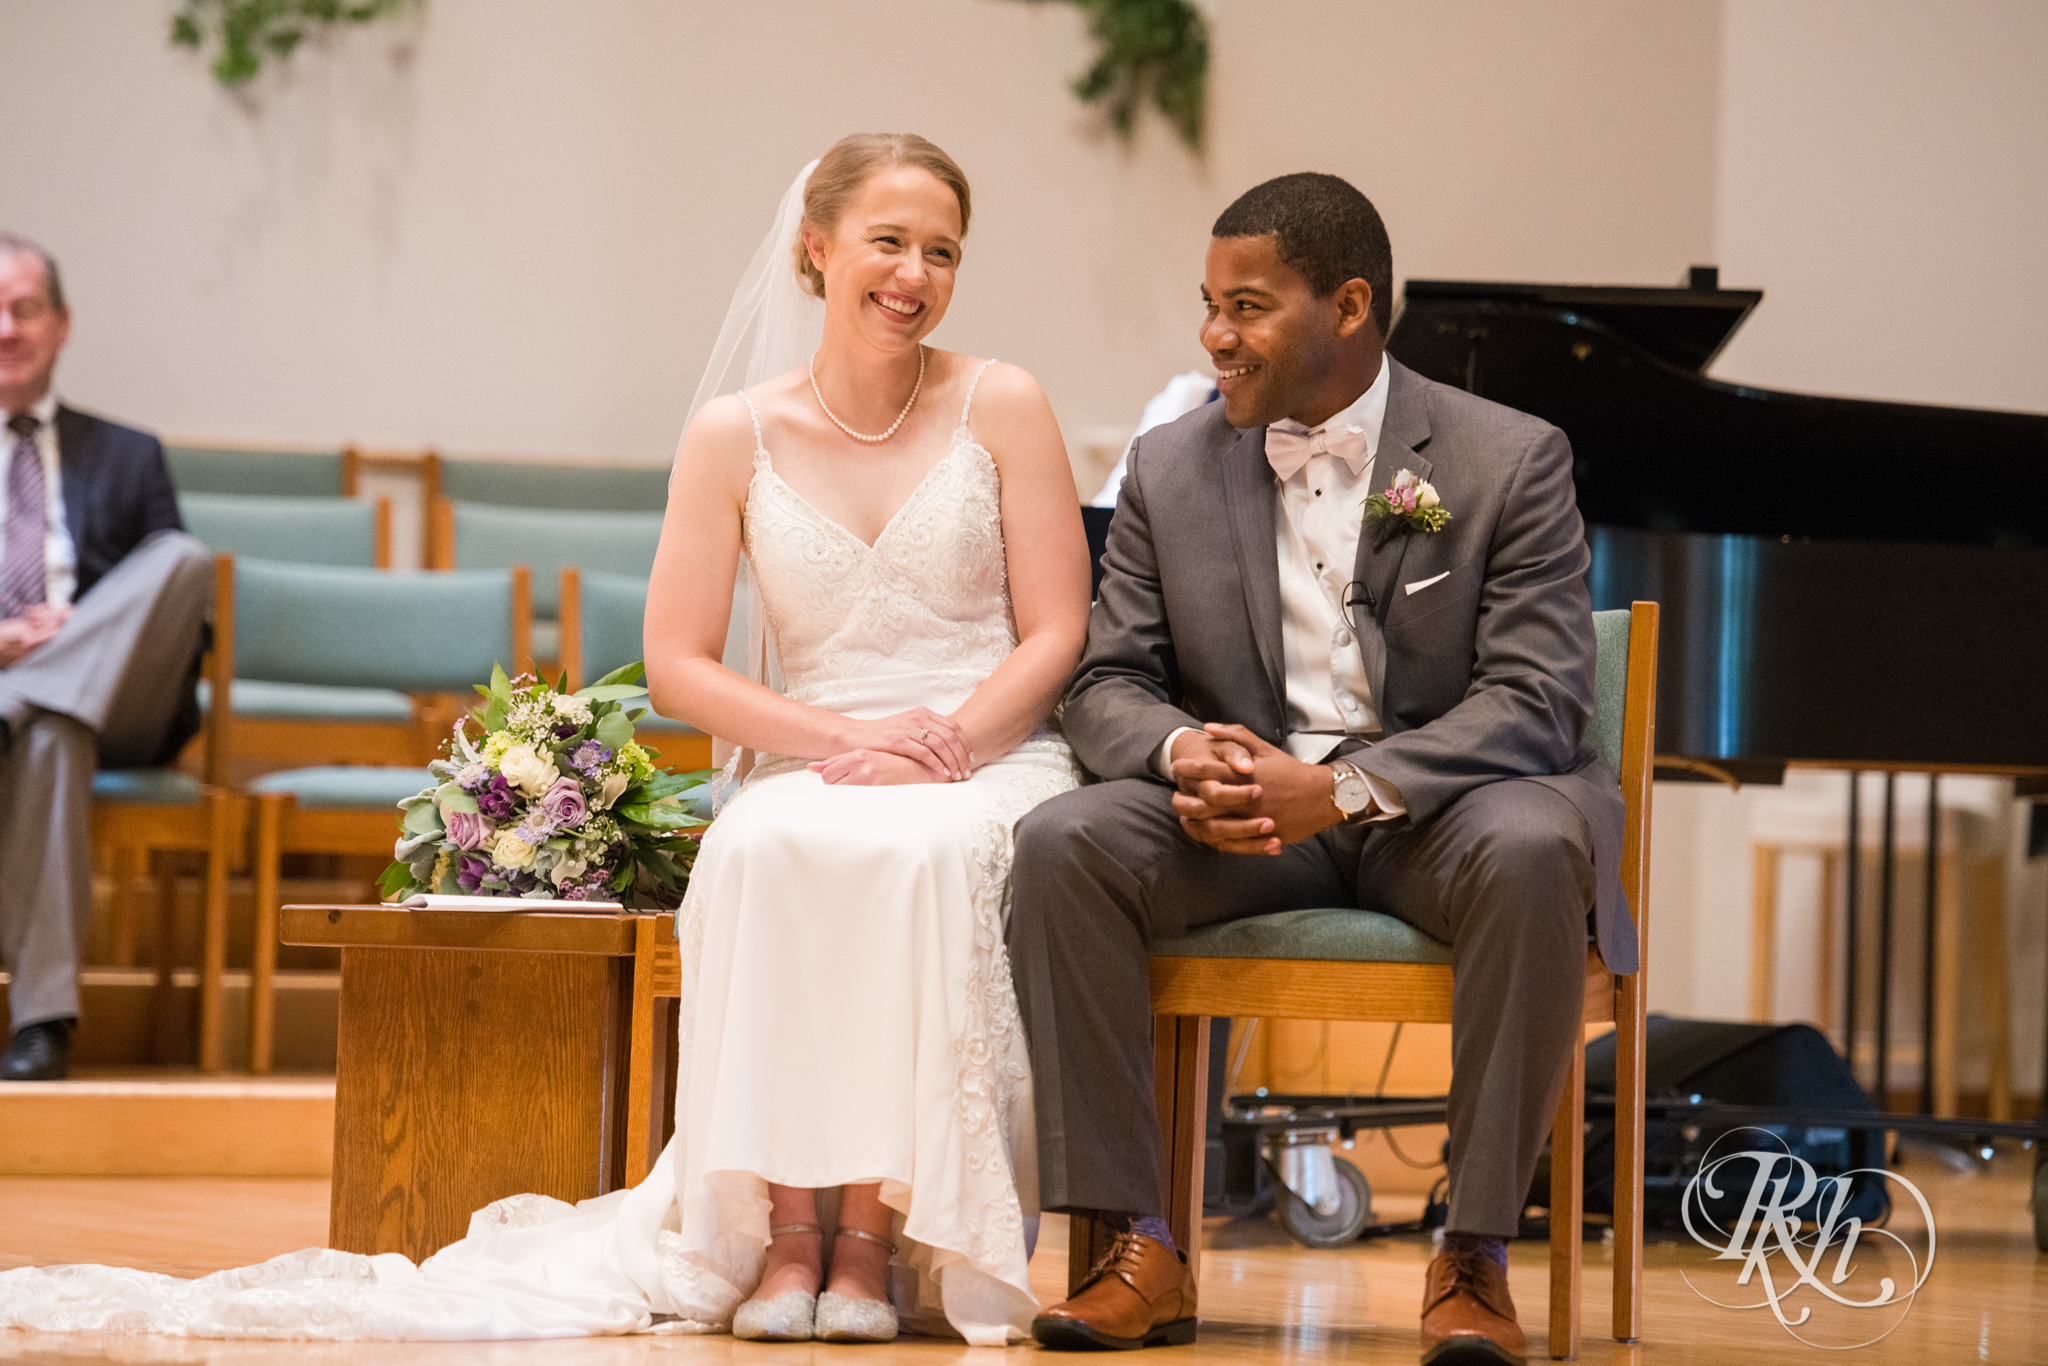 Black groom and white bride laugh during wedding ceremony at church in Richfield, Minnesota.